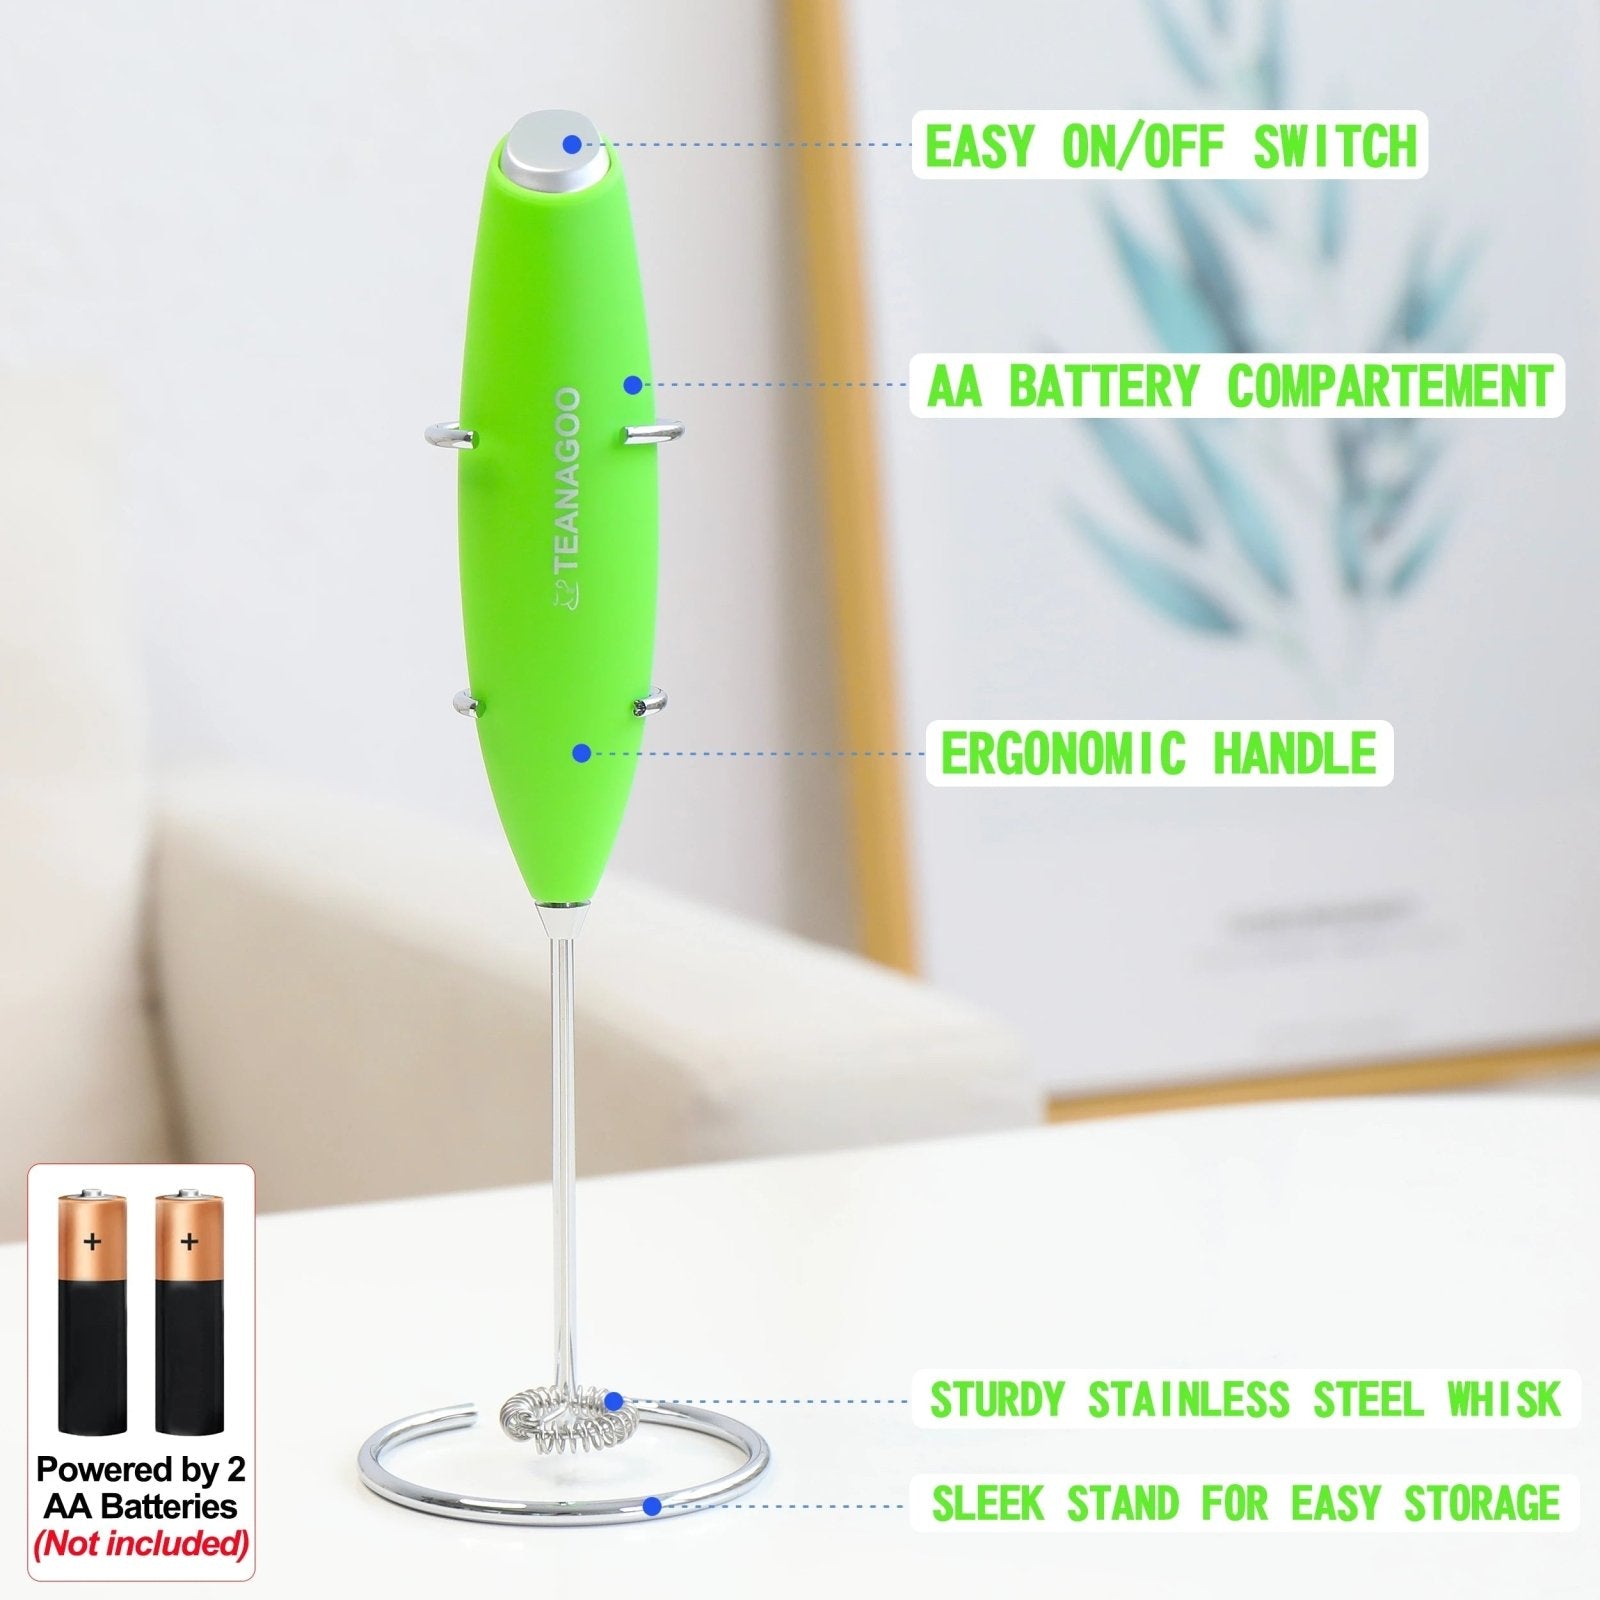 Milk Frother / Electric Matcha Whisk